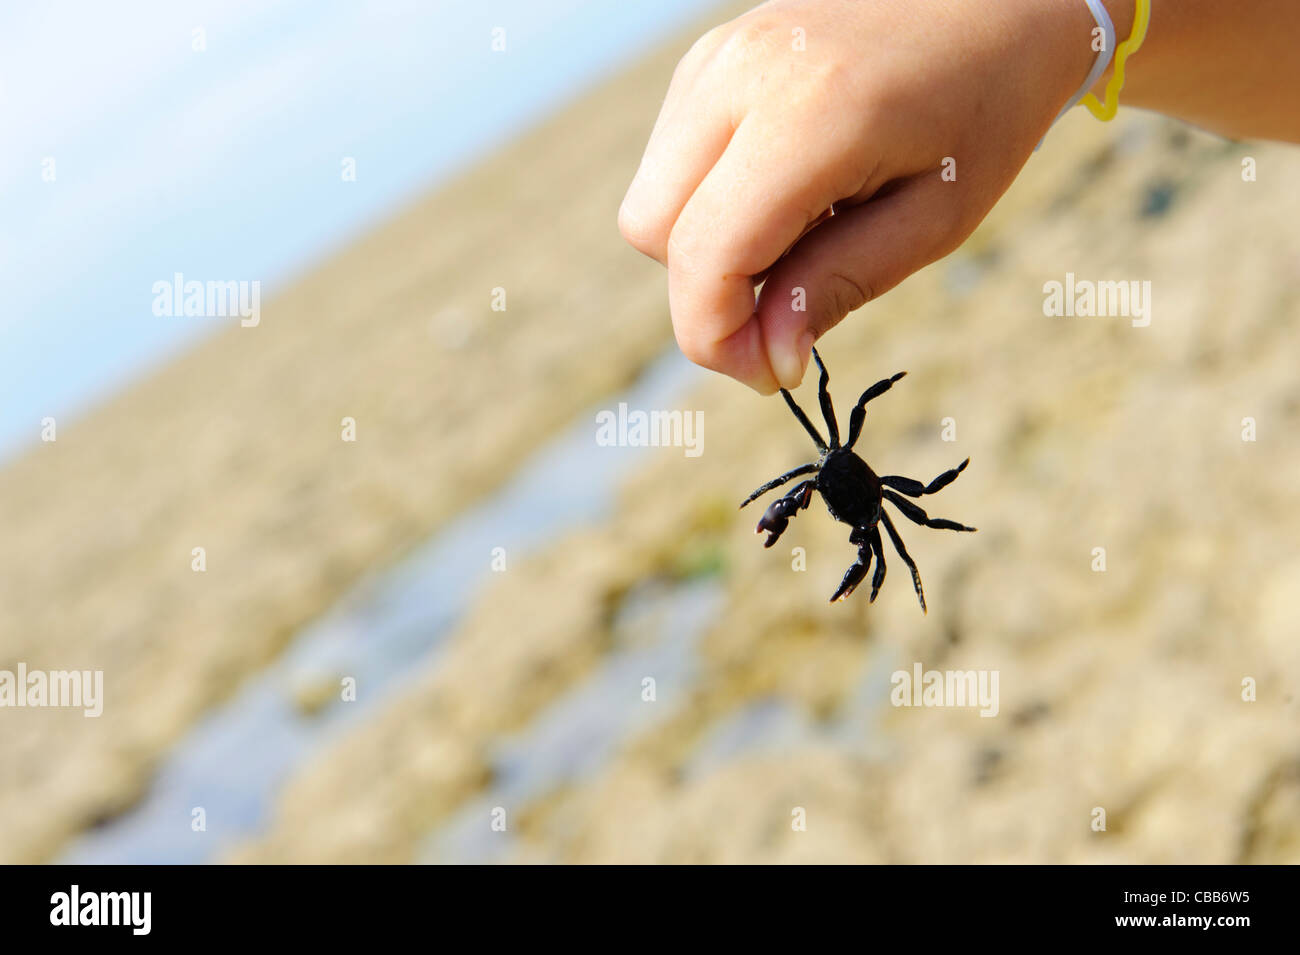 Stock photo of a boys hand holding a black crab. Stock Photo